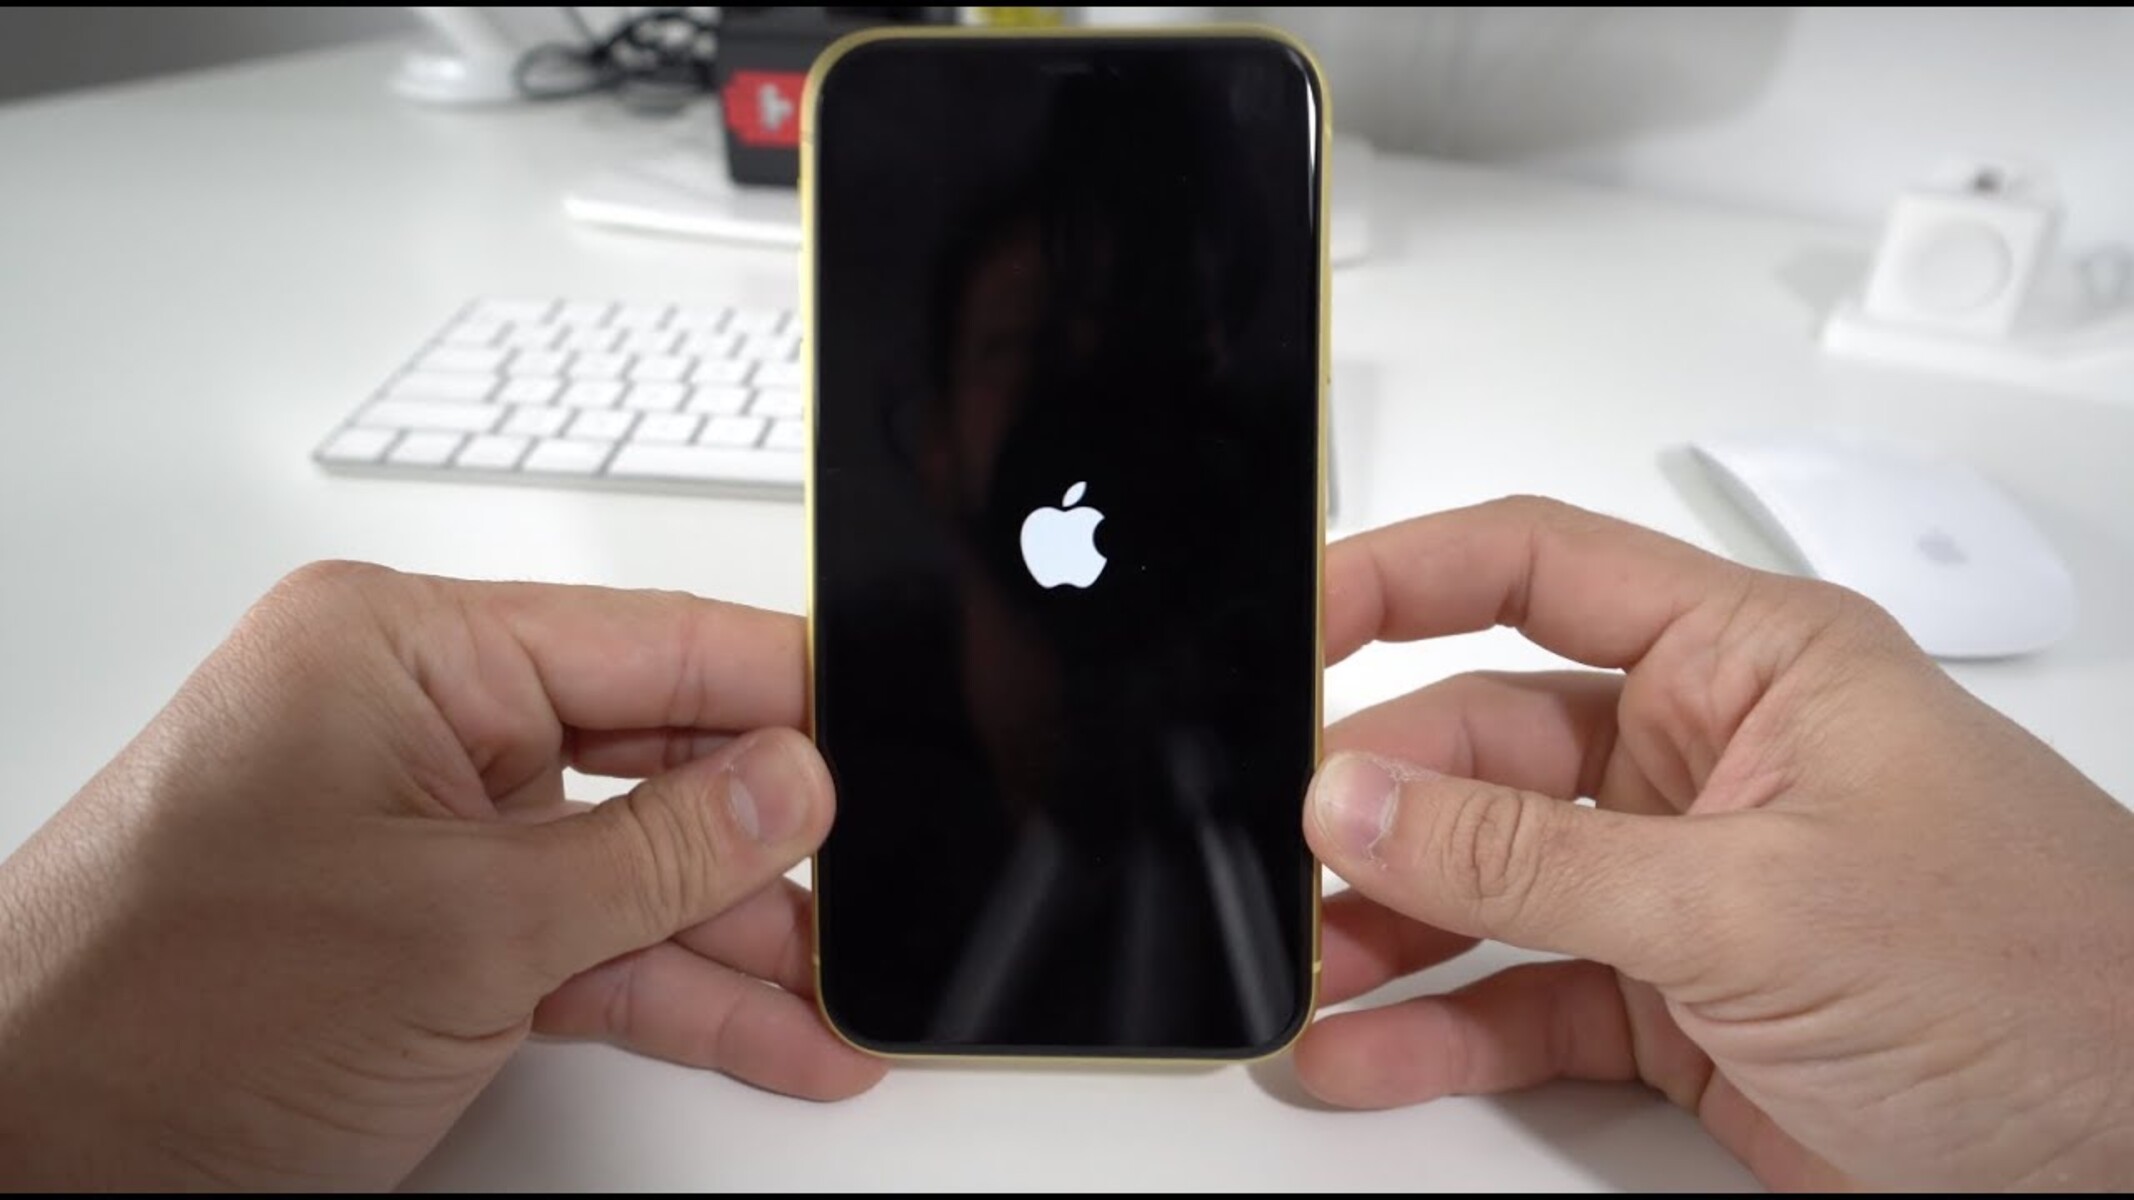 Screen Not Working Shutdown: Turning Off IPhone 11 With A Non-working Screen